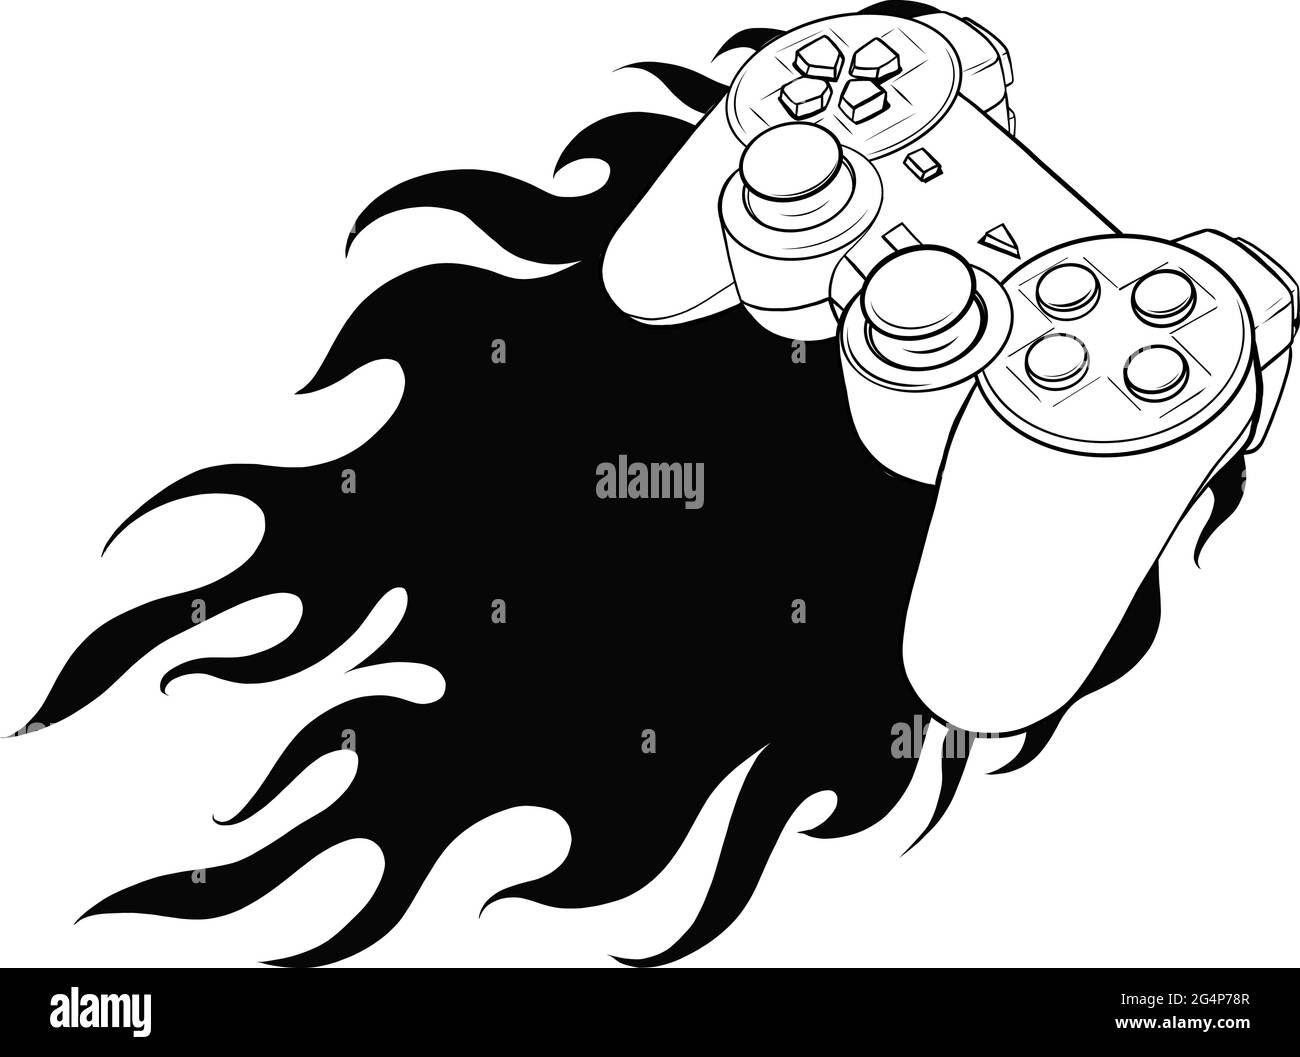 silhouette joypad with flames for gaming vector illustration Stock Vector